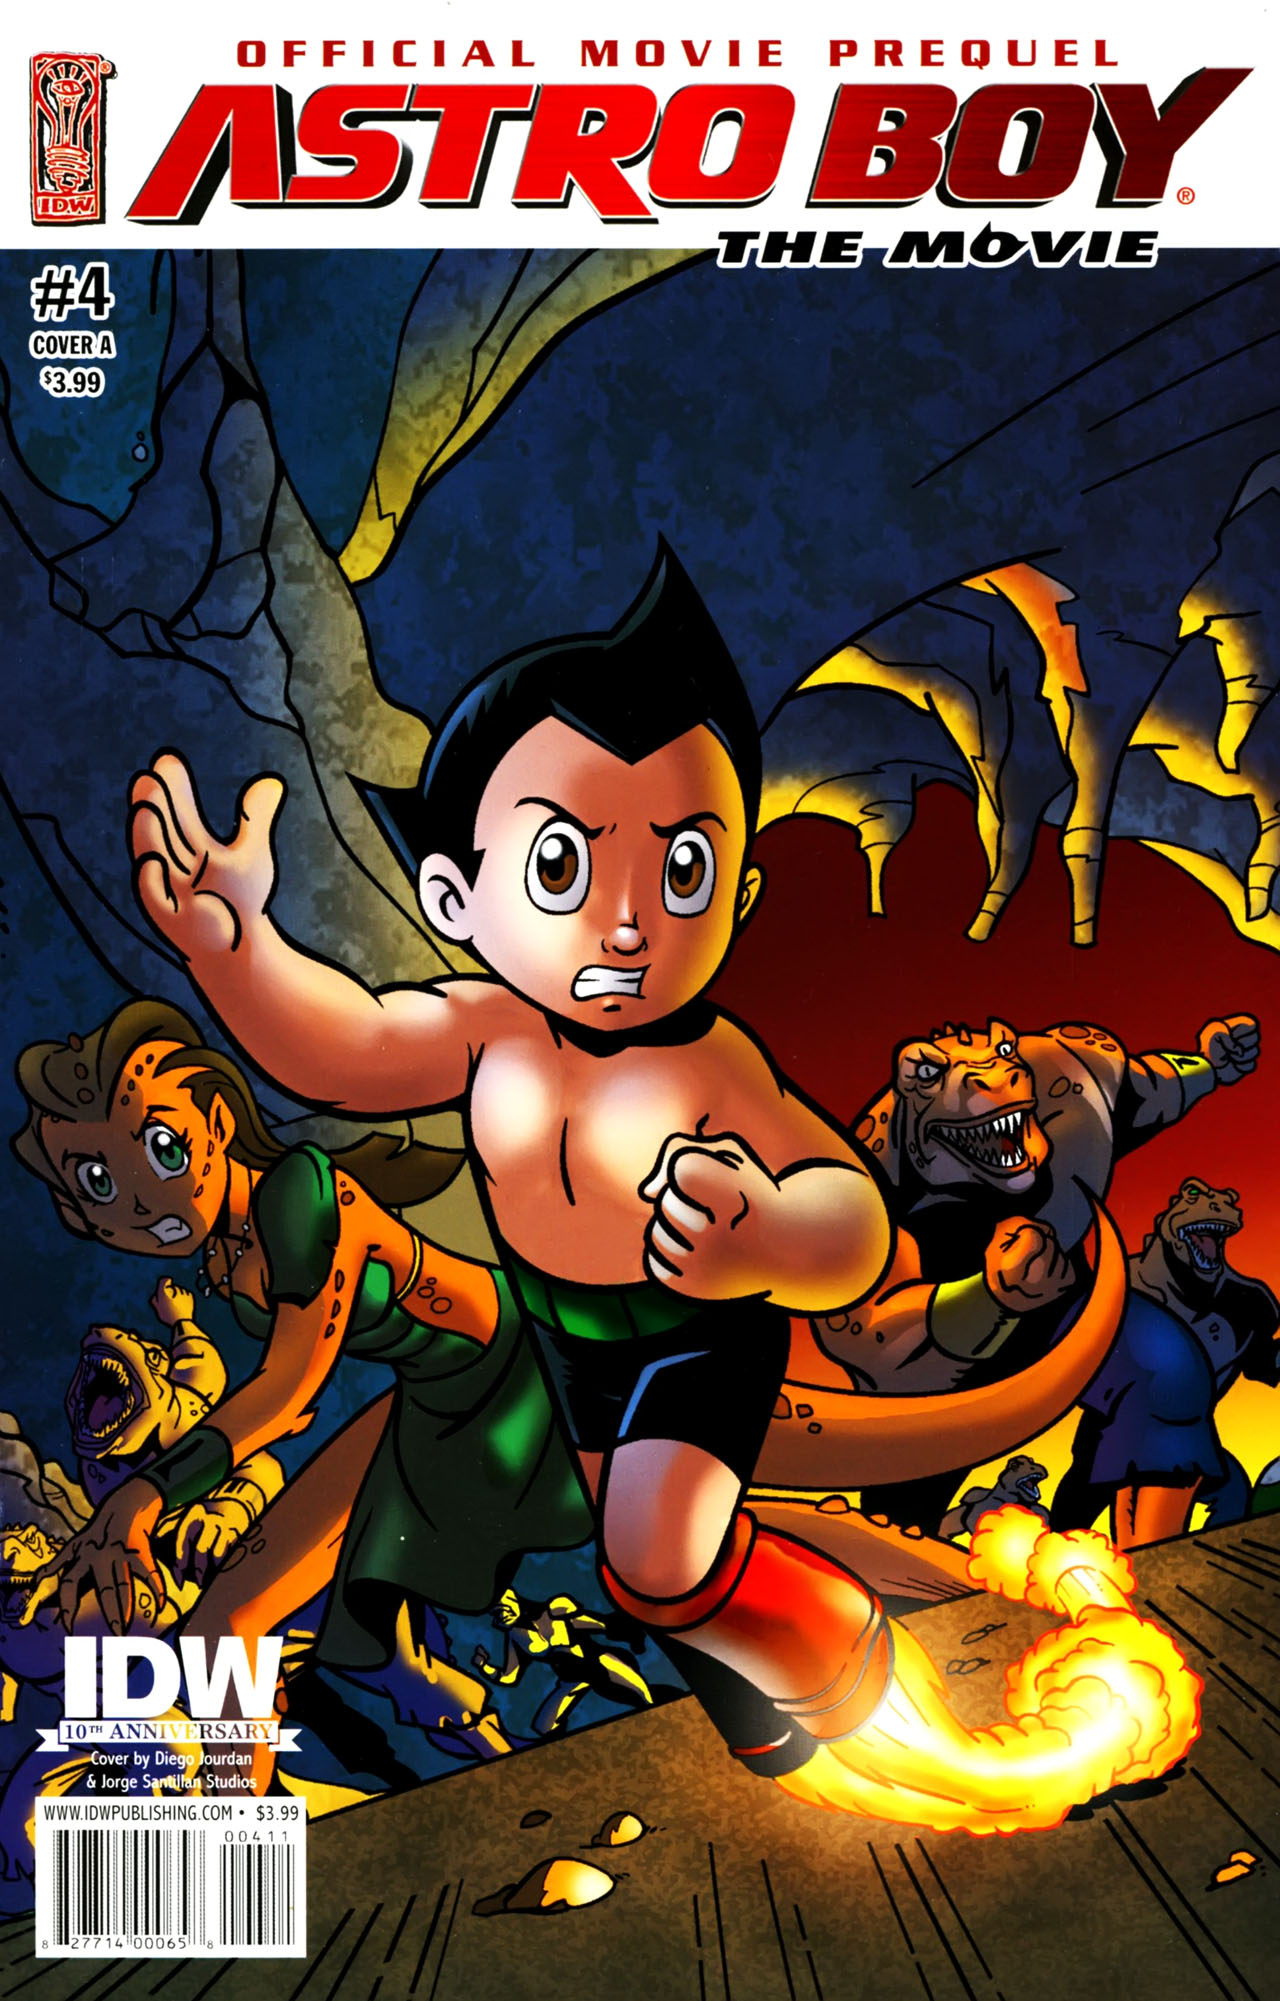 Read online Astro Boy: The Movie: Official Movie Prequel comic -  Issue #4 - 1